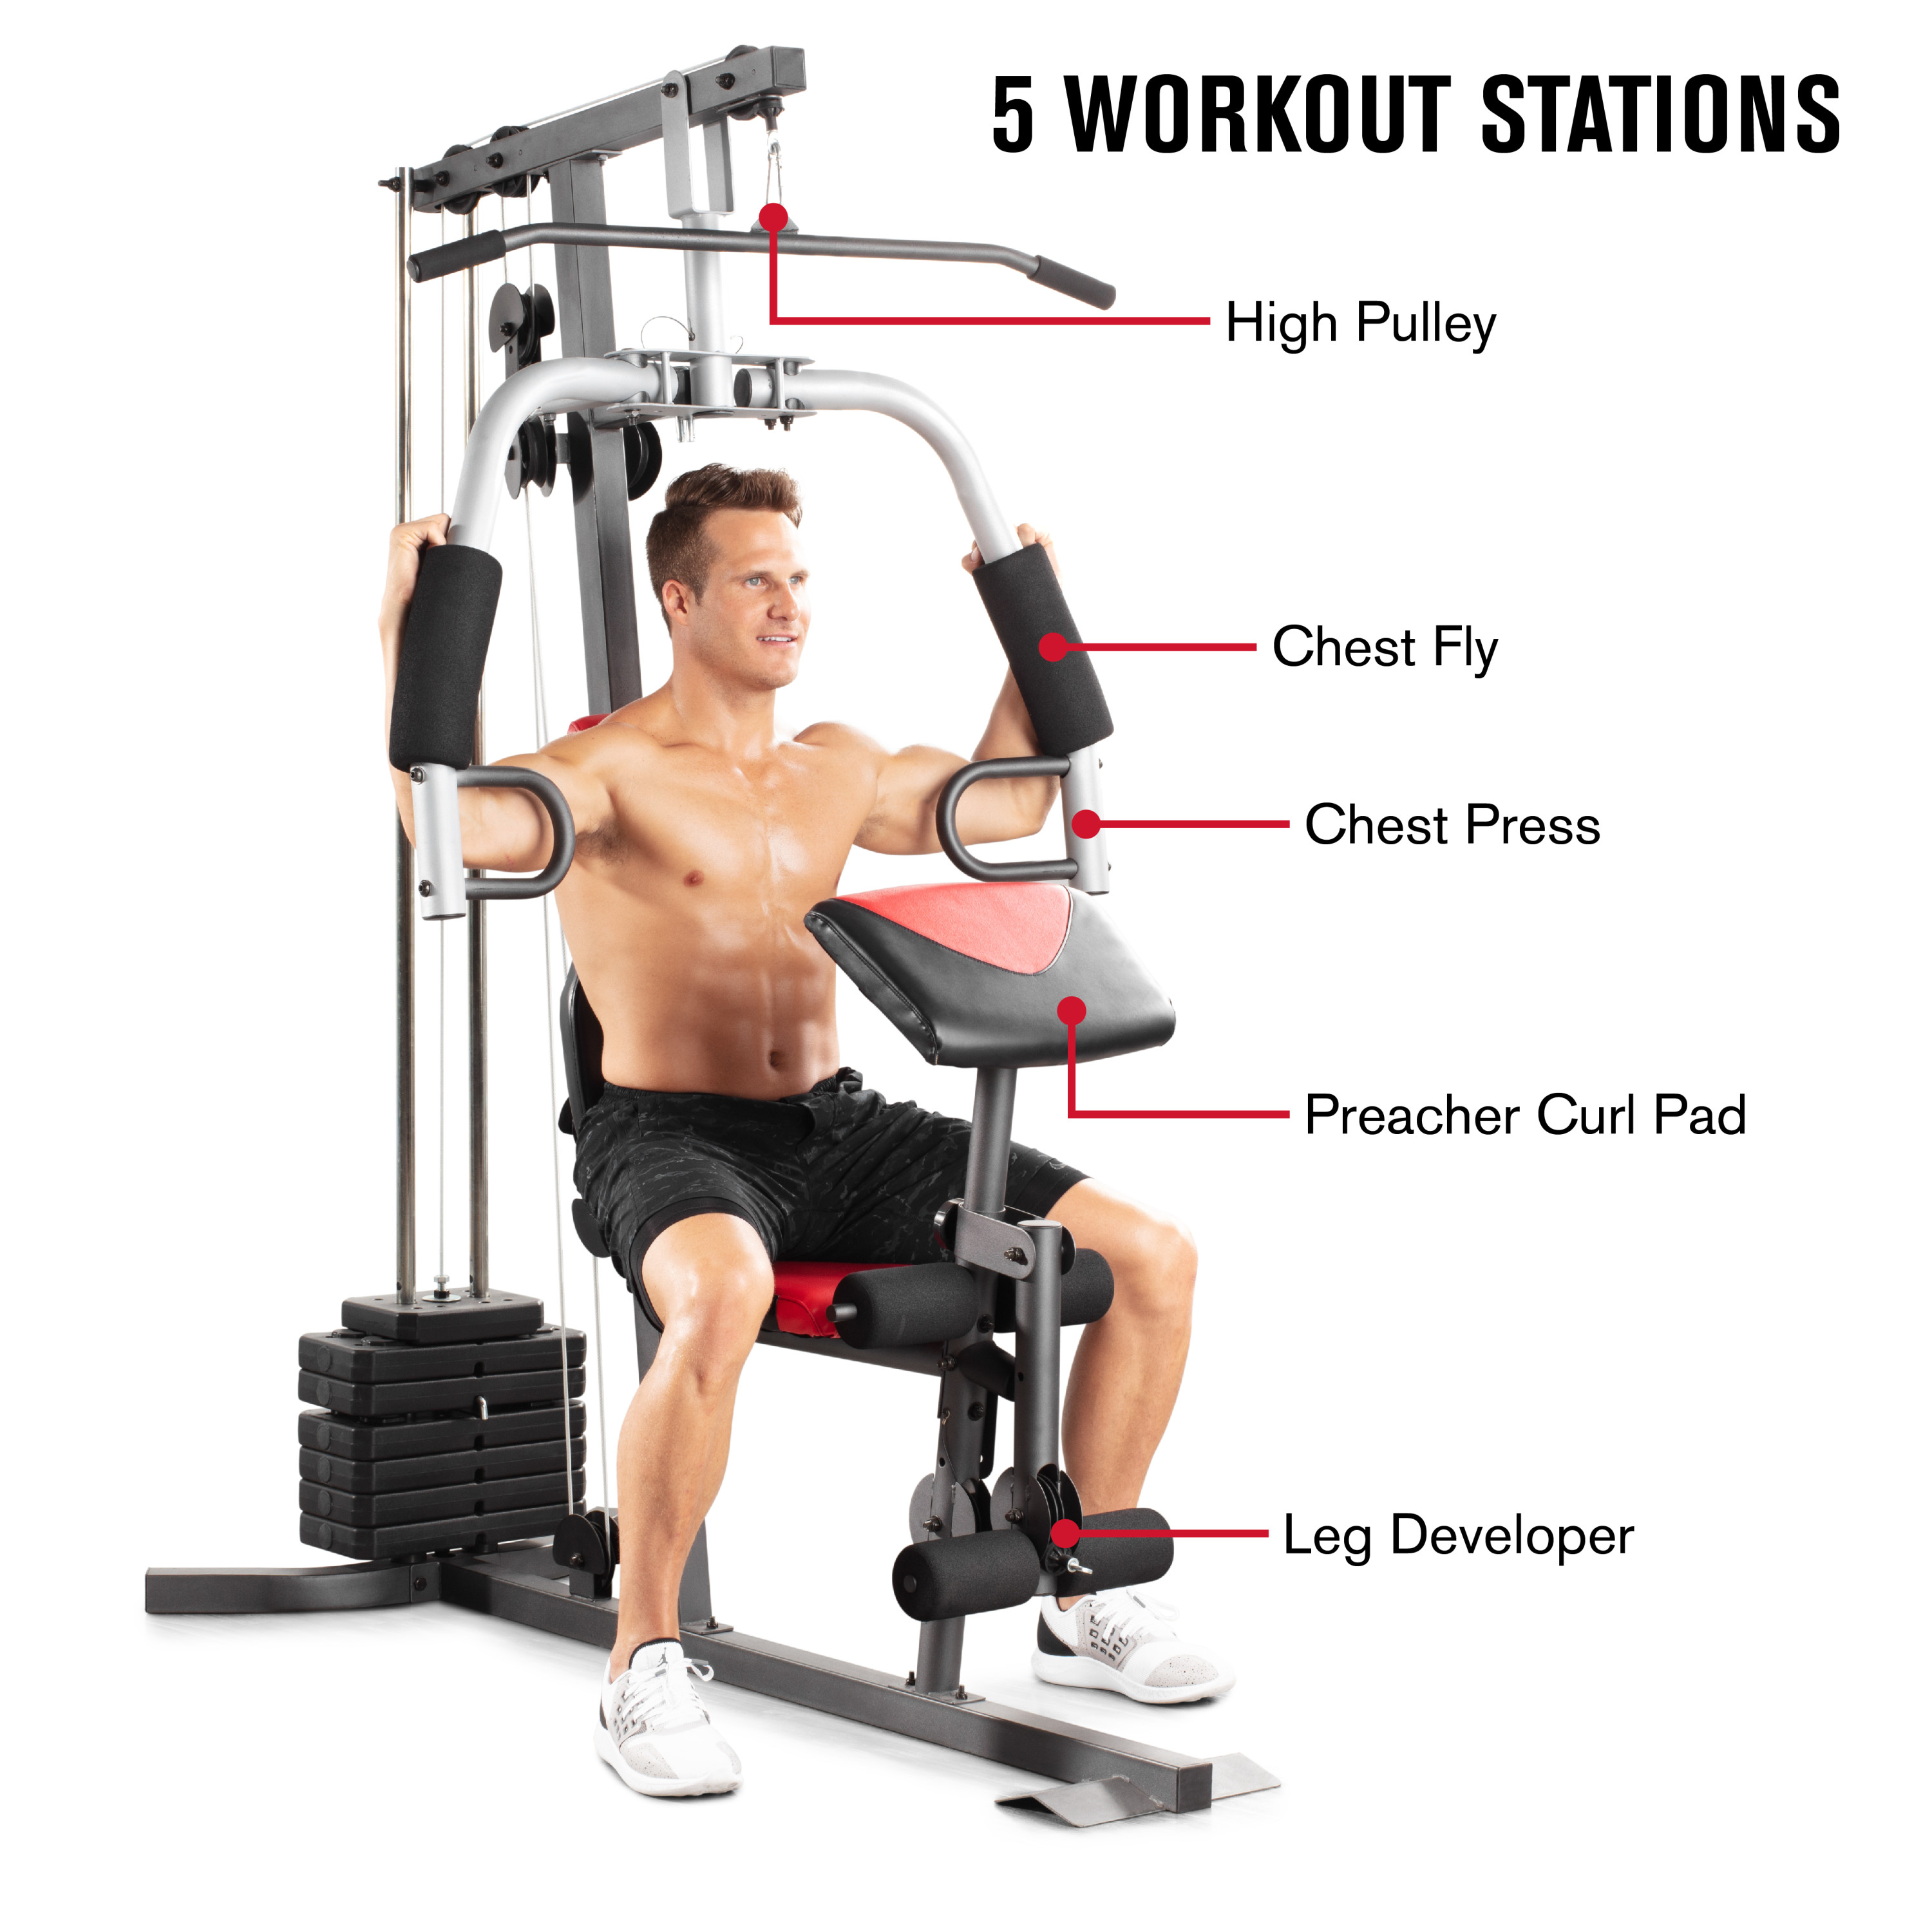 Weider 2980 X Home Gym System with 80 Lb. Vinyl Weight Stack - image 4 of 26